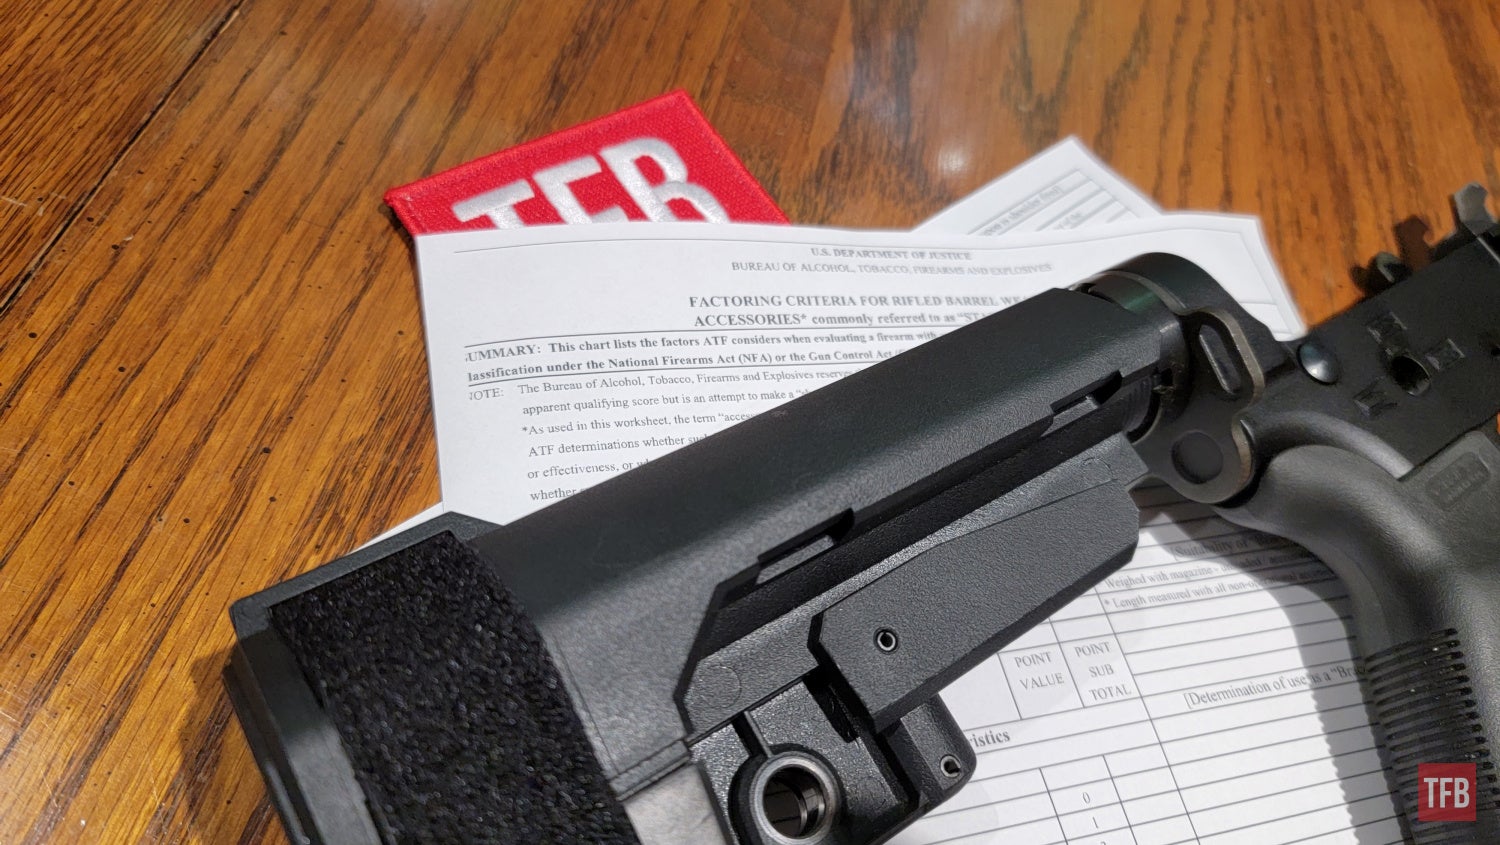 How to Effectively Comment on Proposed ATF Regulations